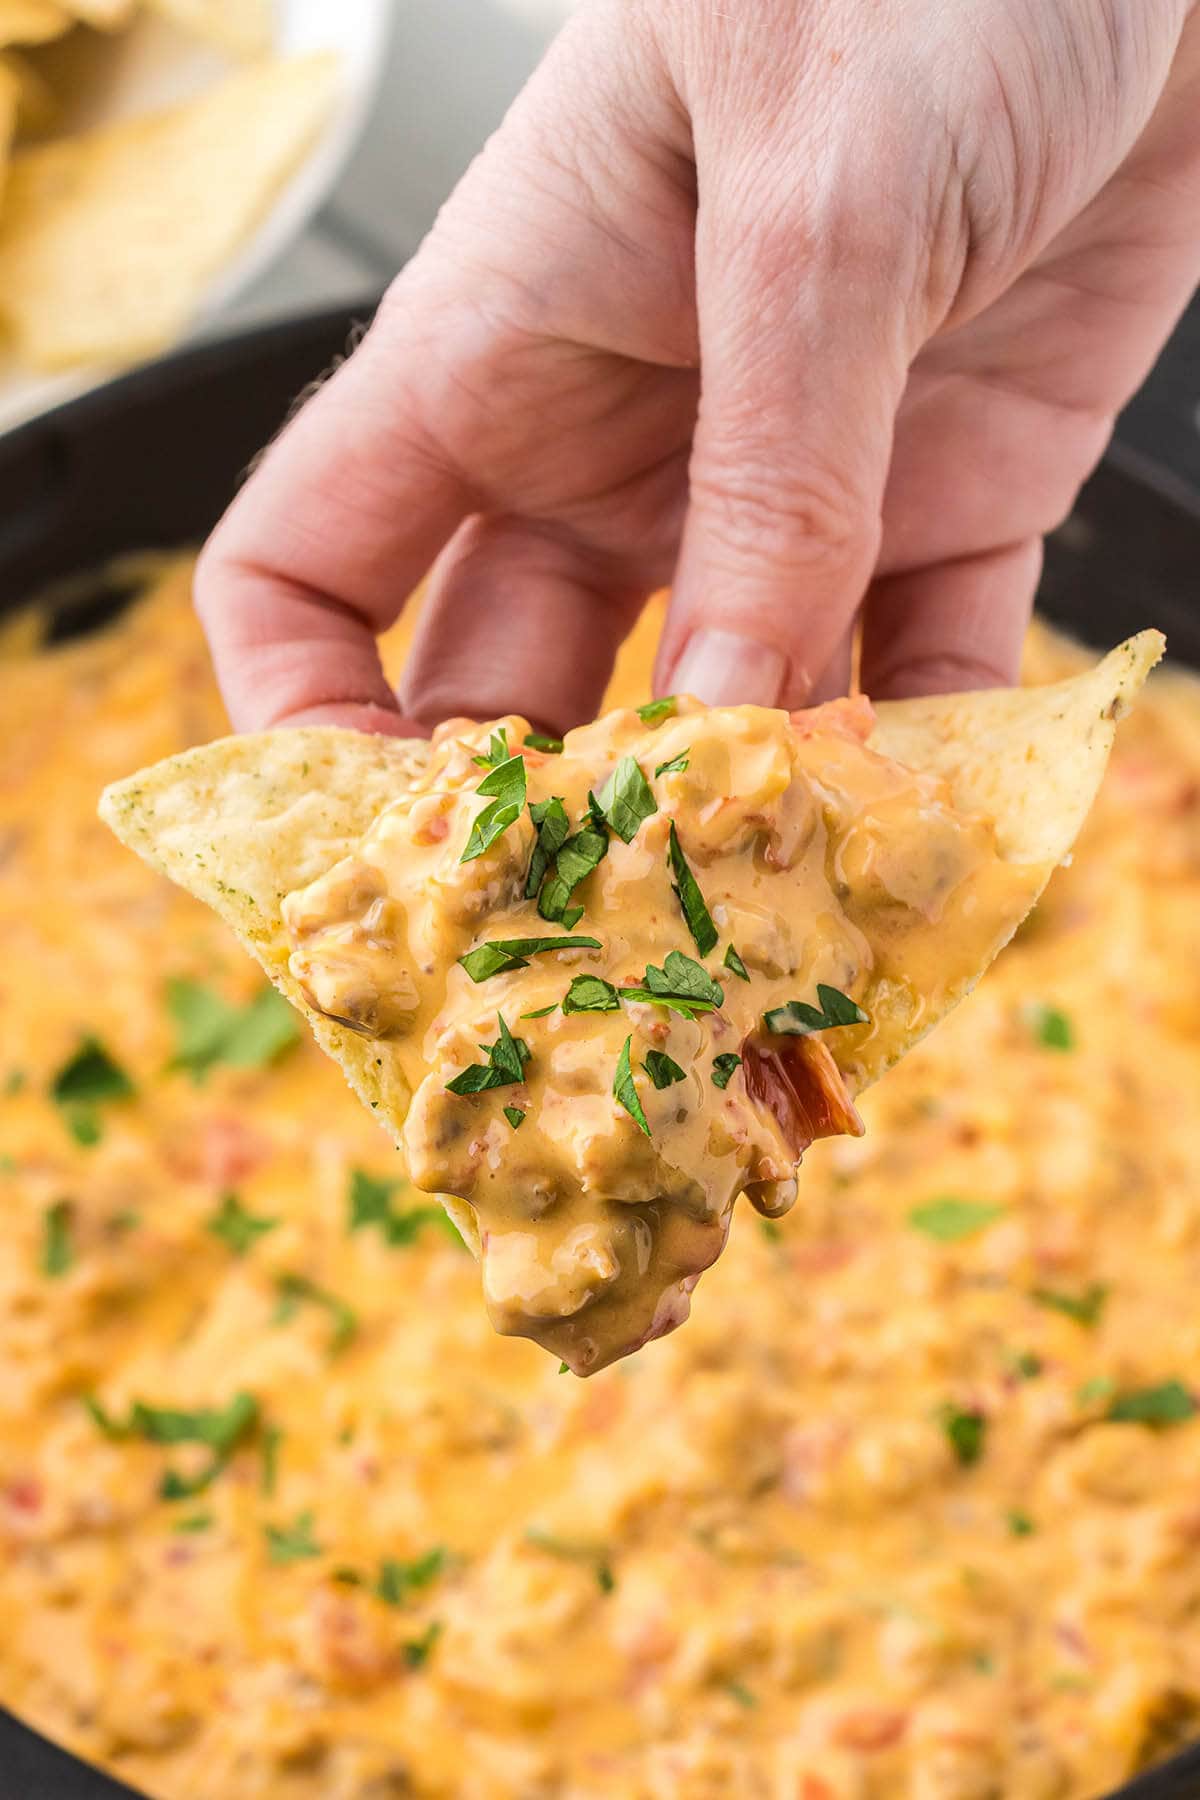 Hand holding tortilla chip filled with sausage and cheese dip, ready to take a bite!